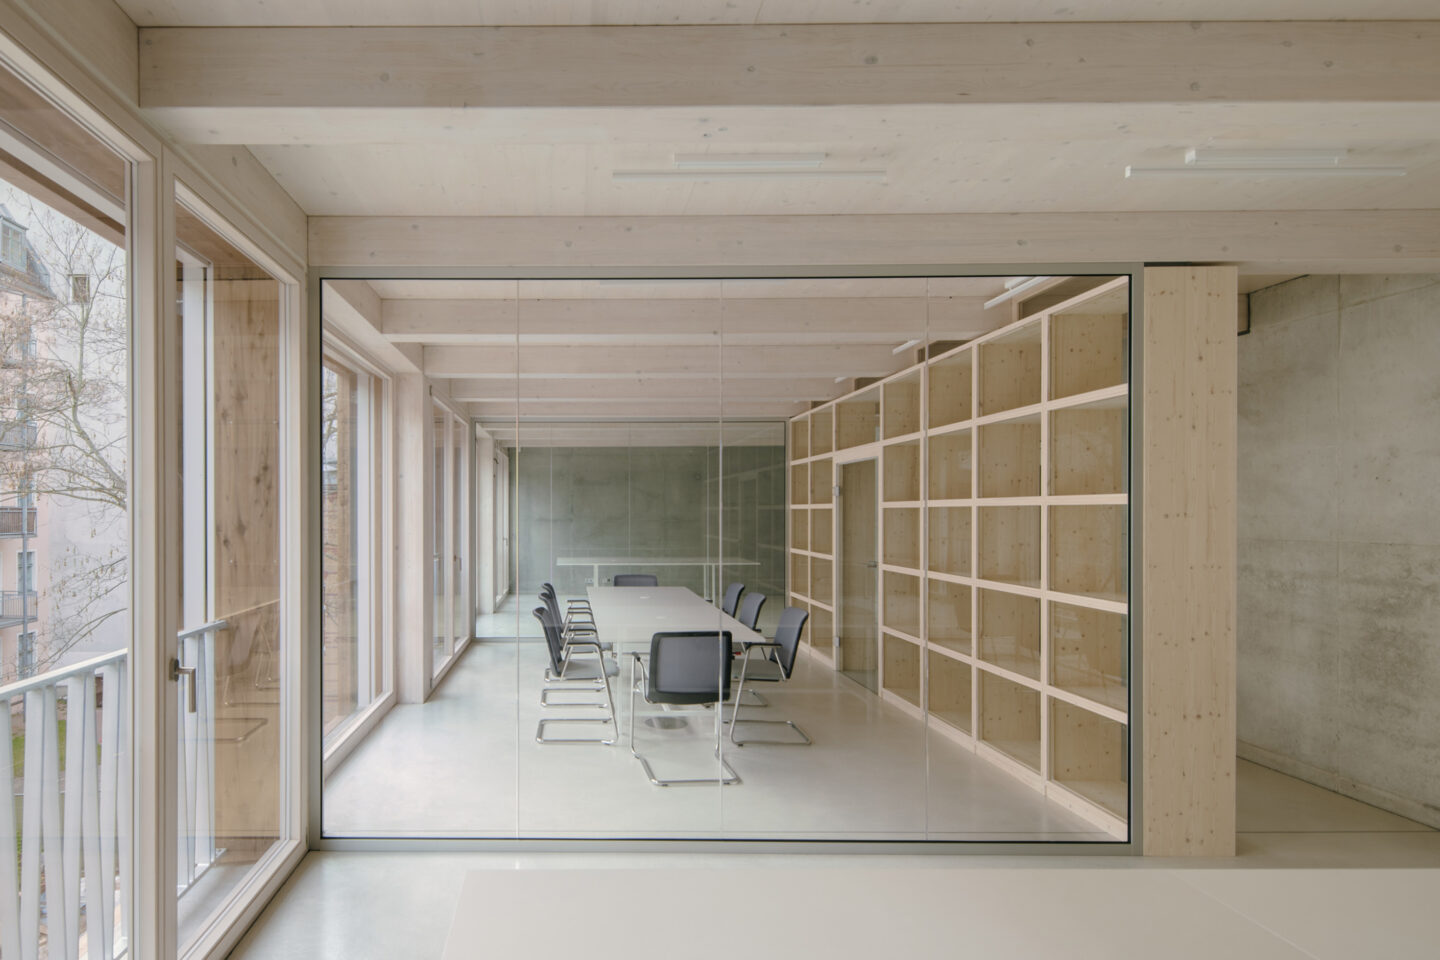 Remise Immanuelkirchstraße Berlin | office with feco glass wall